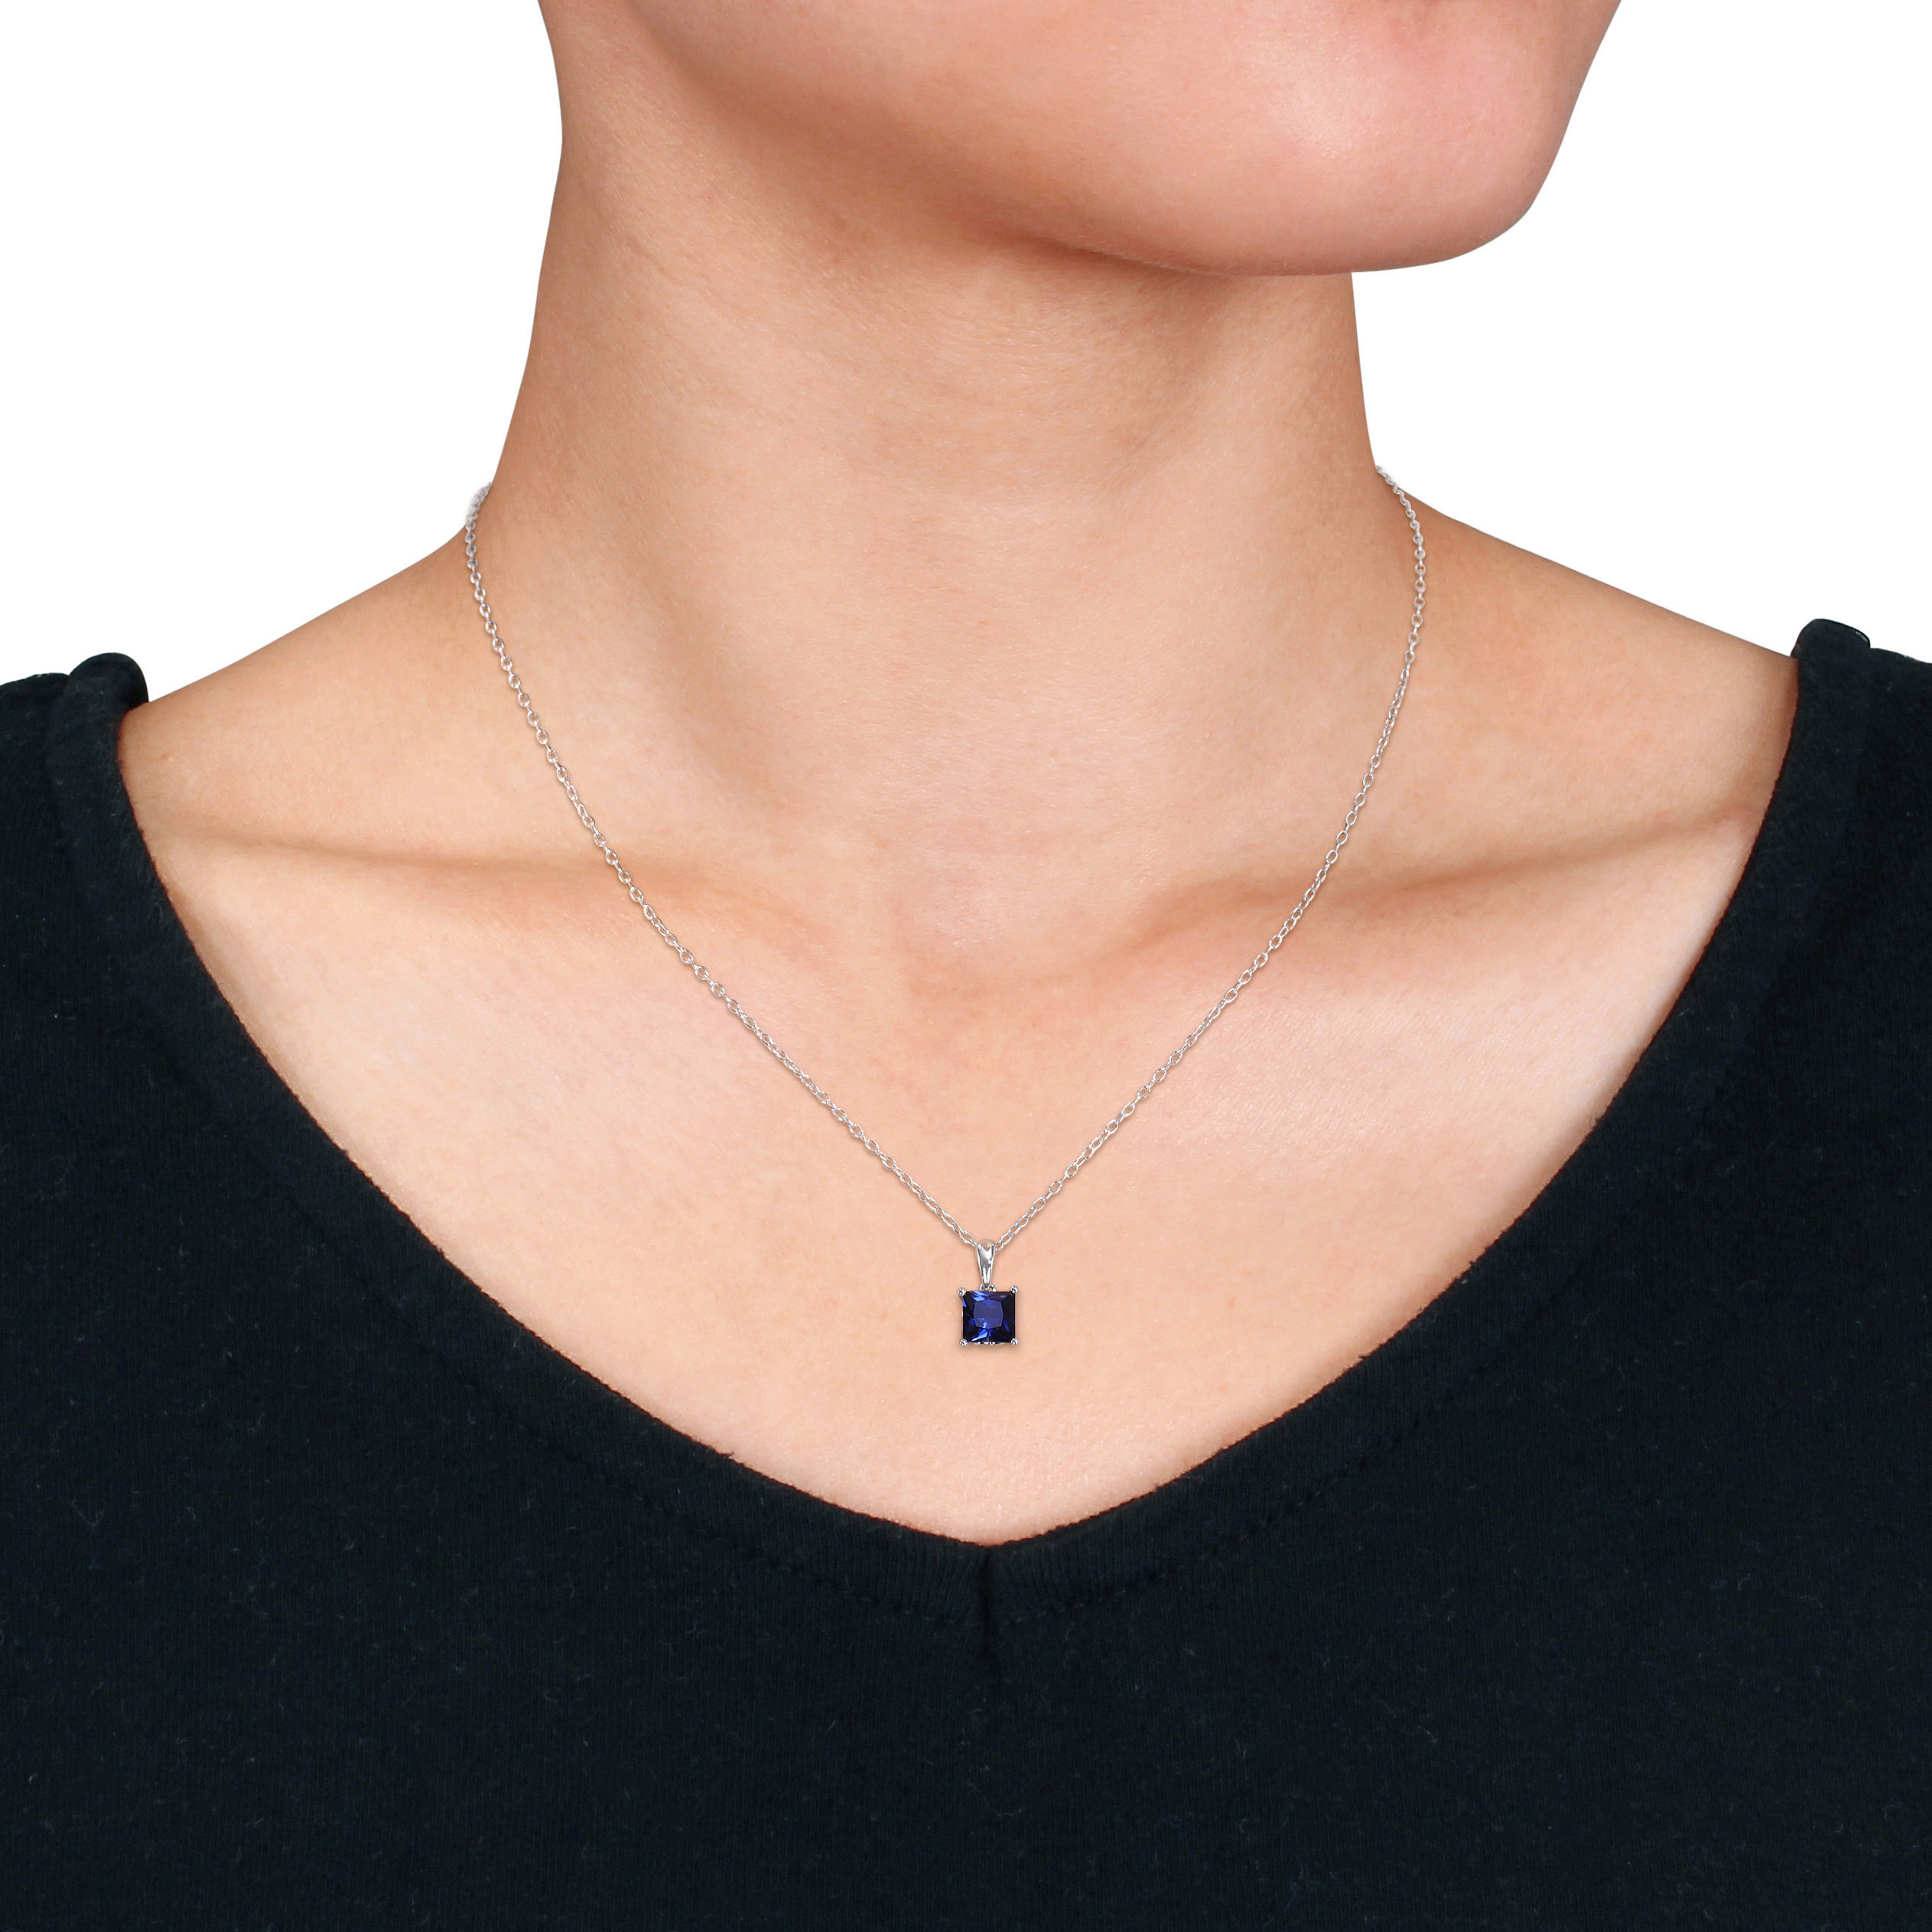 1 1/3 CT TGW Princess Cut Created Blue Sapphire Solitaire Heart Design Pendant with Chain in Sterling Silver - 18 in.